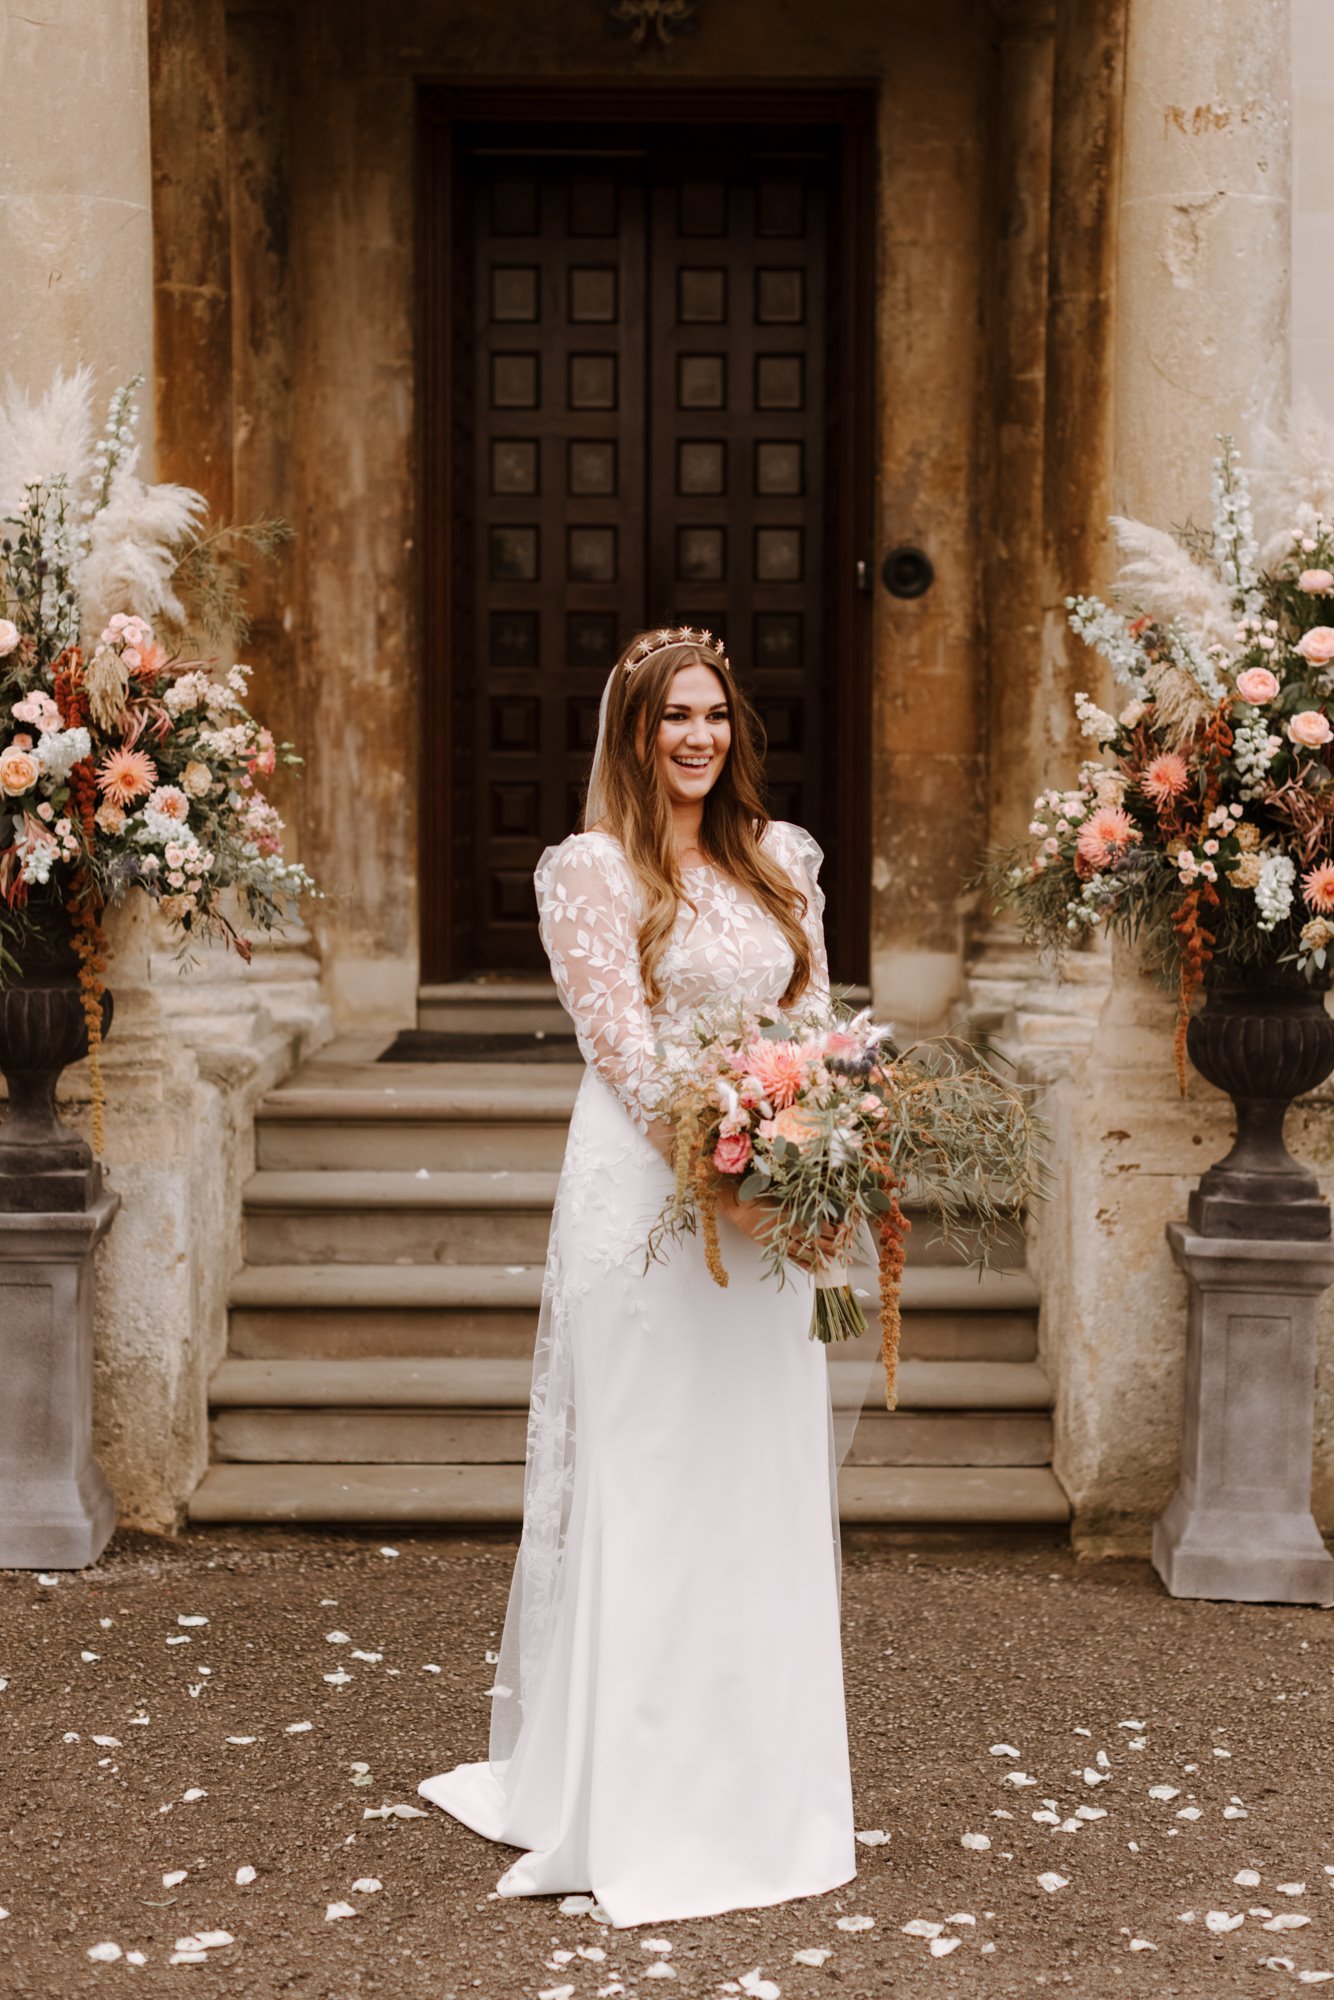 Boho bride in design lace dress and crown at her september wedding day at stately home elmore court